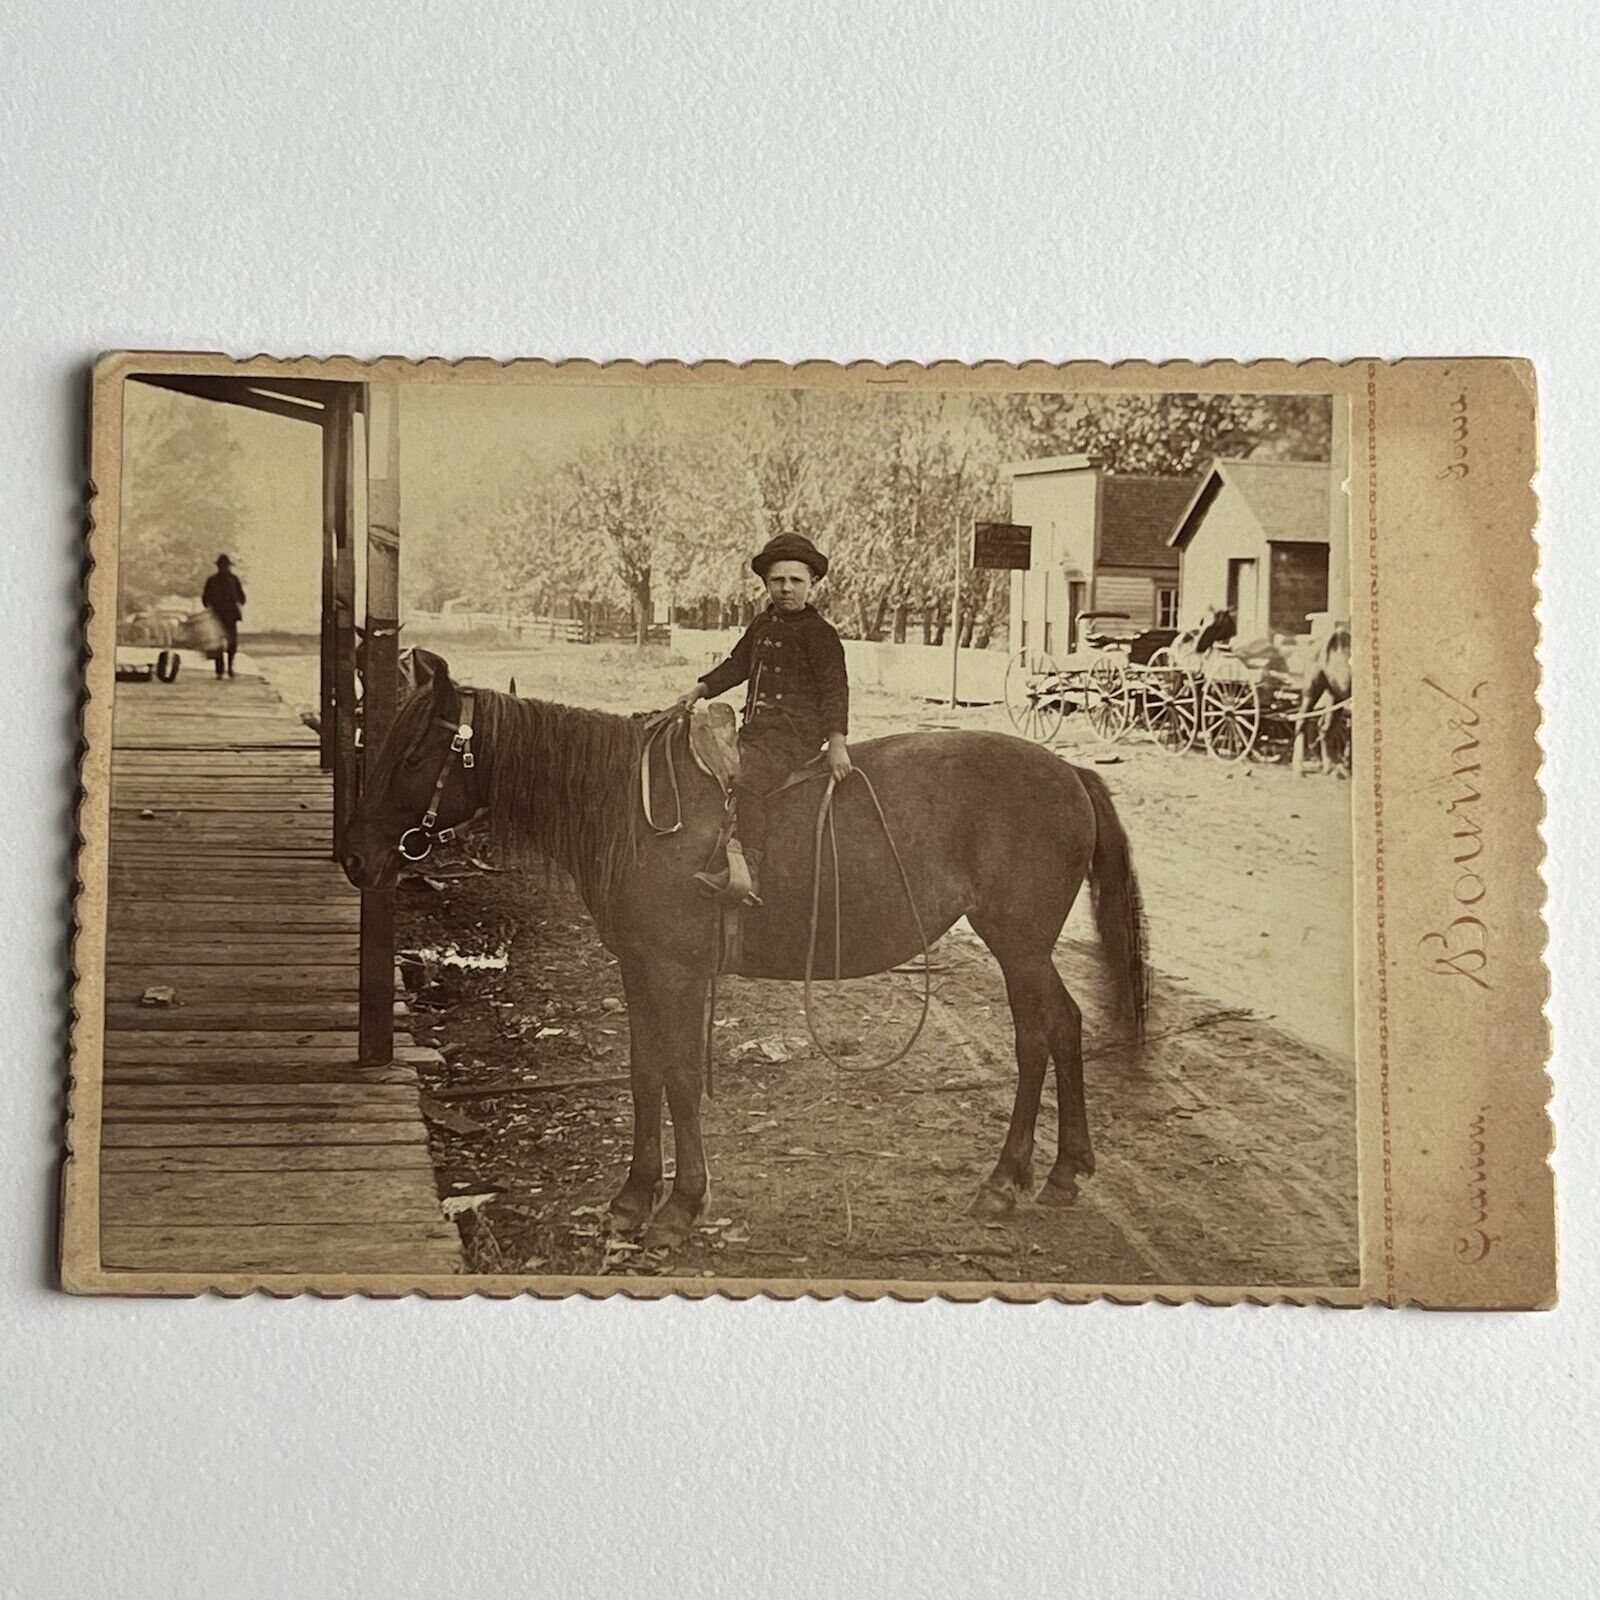 Antique Cabinet Card Photograph Sweet Little Boy On Horse Street View Clarion IA